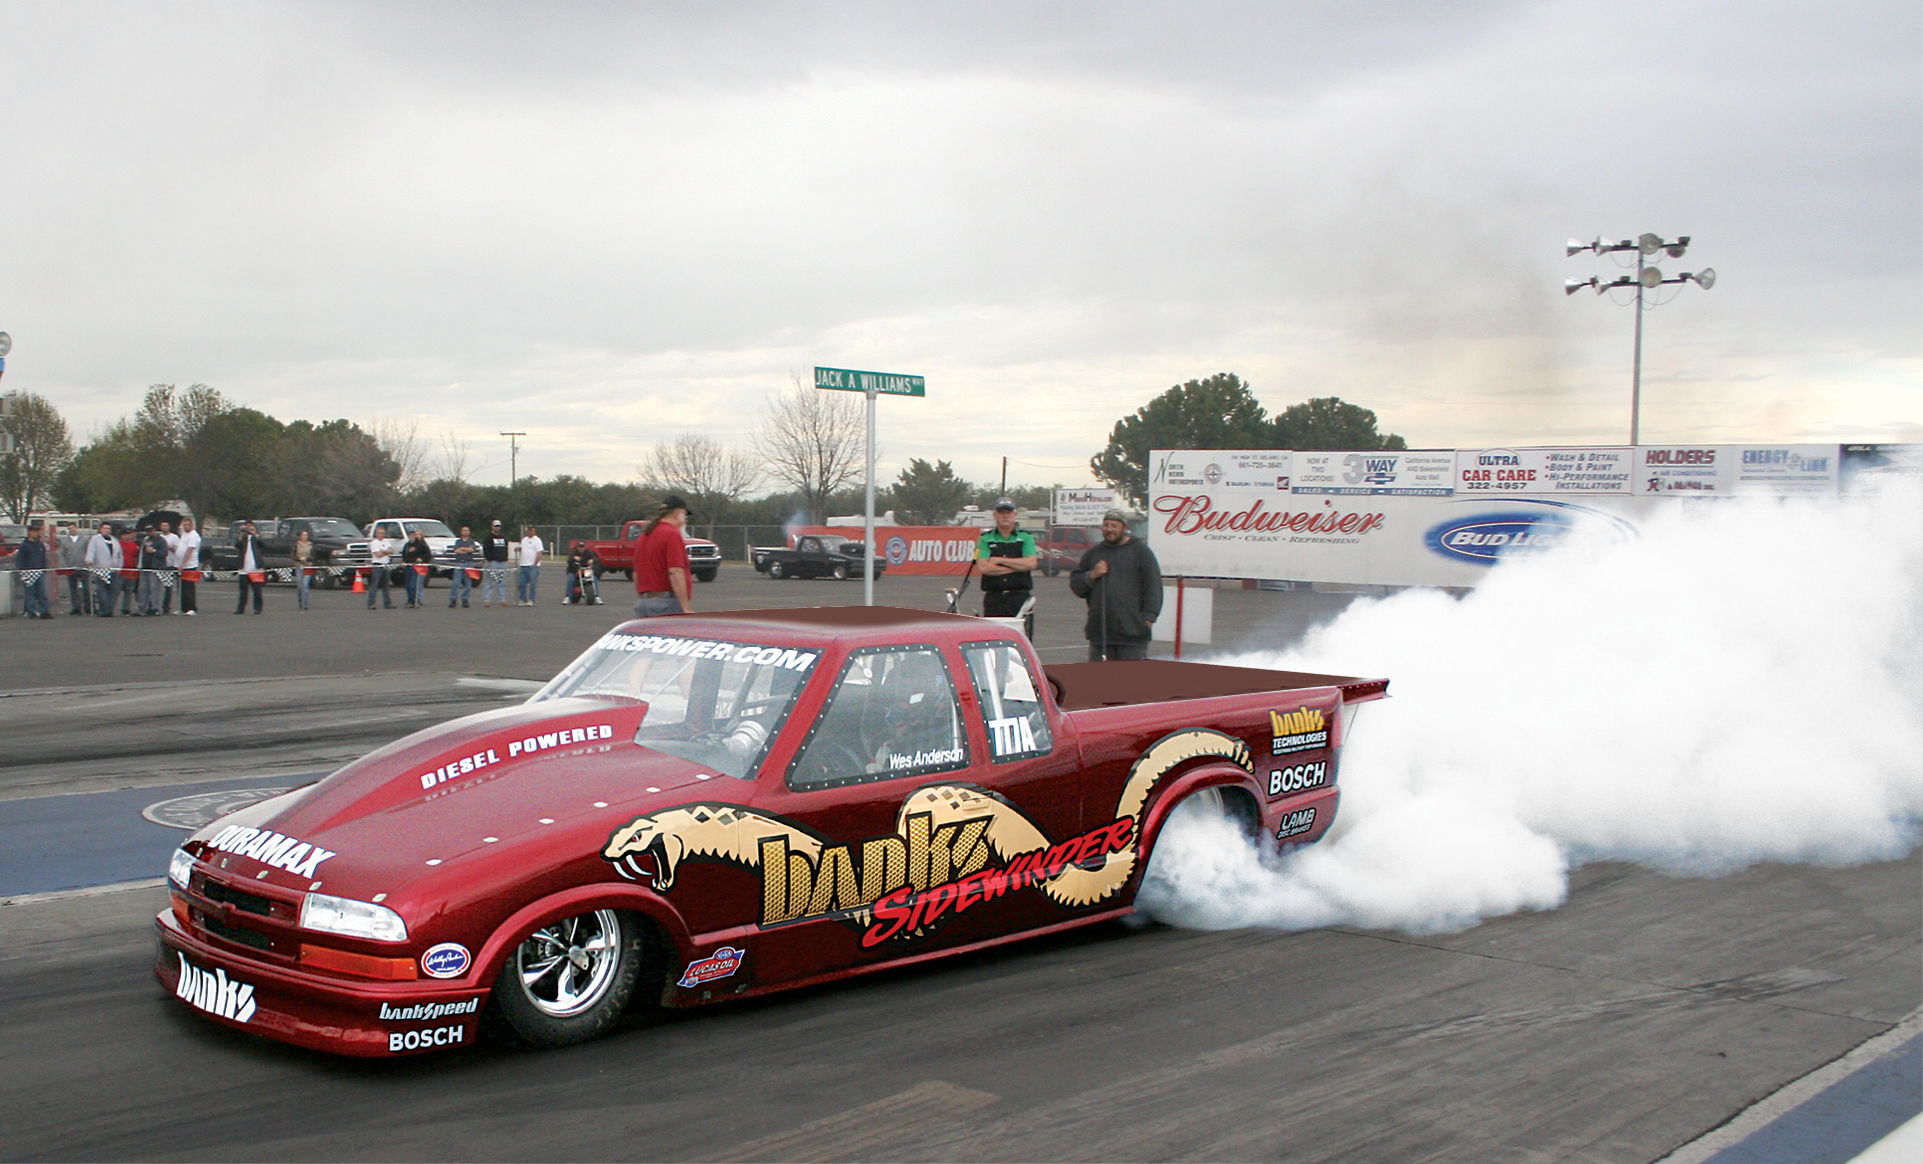 , Banks Power, dragster, chevy, s-10, drag, racing, diesel, pickup, truck, ...